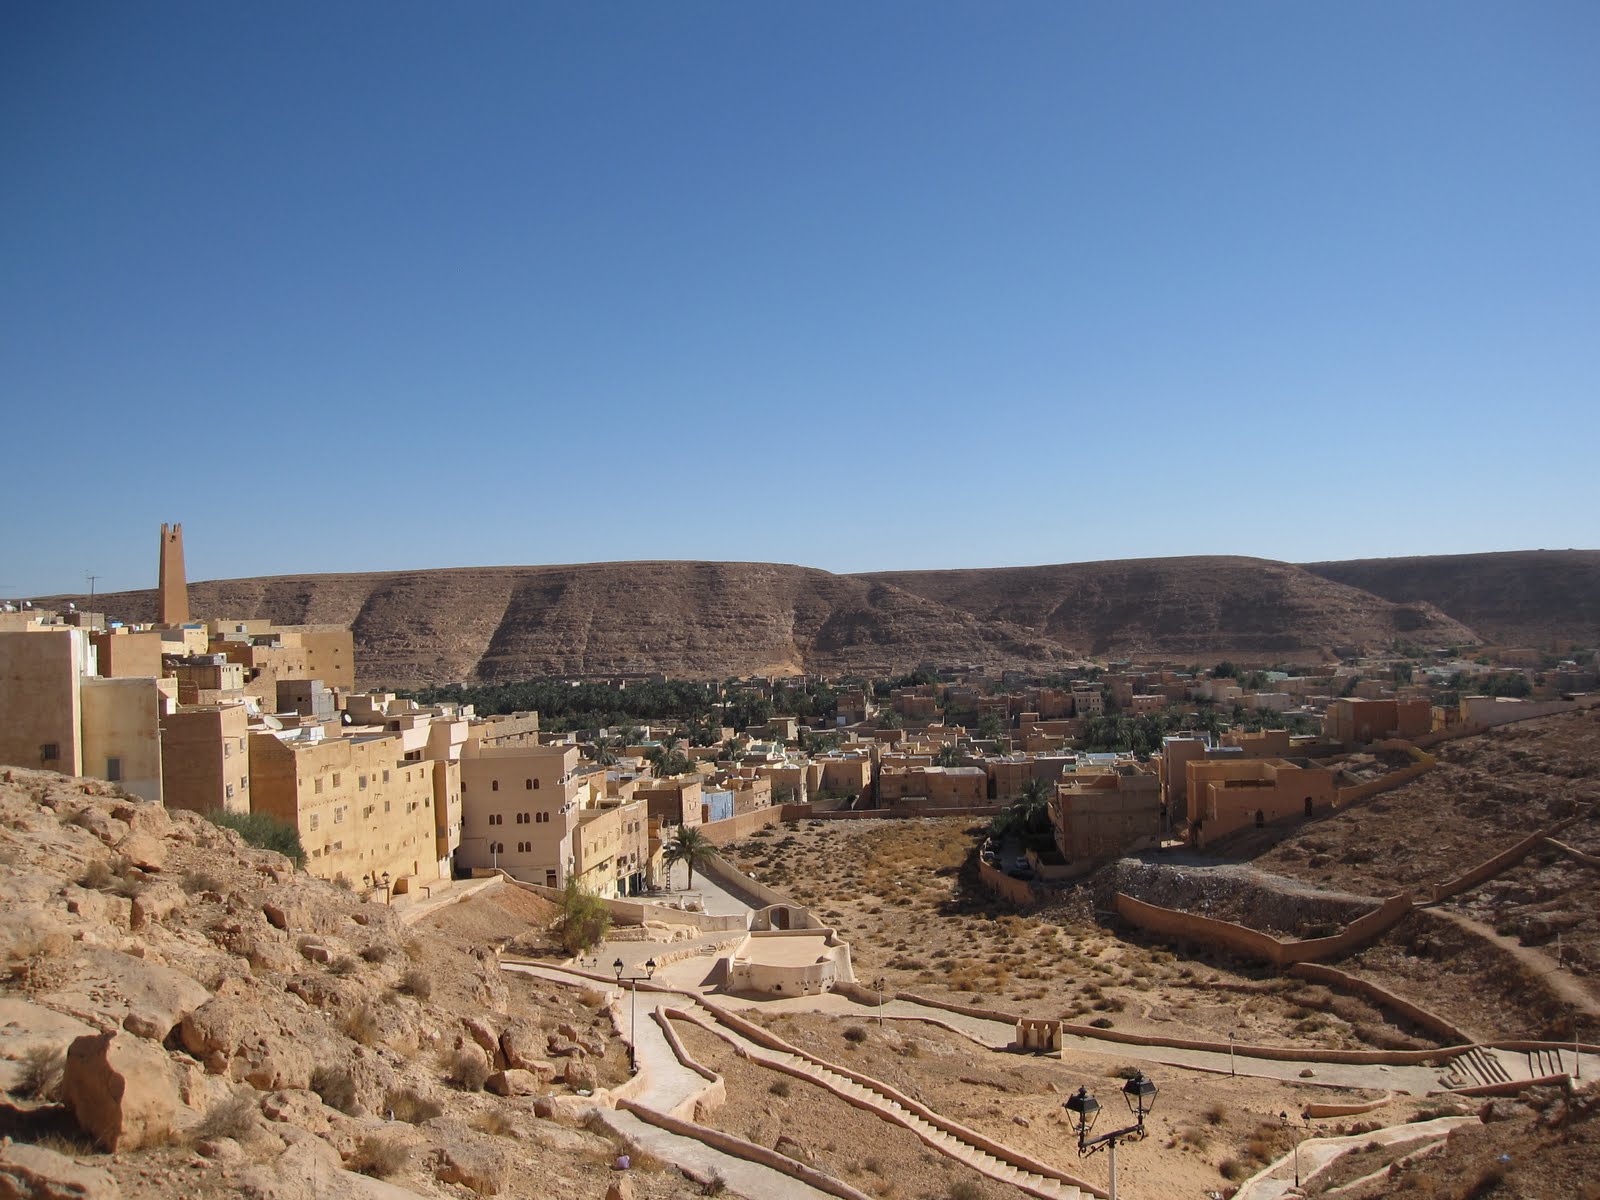 El-Atteuf, the oldest of the five valley towns, founded in 1013